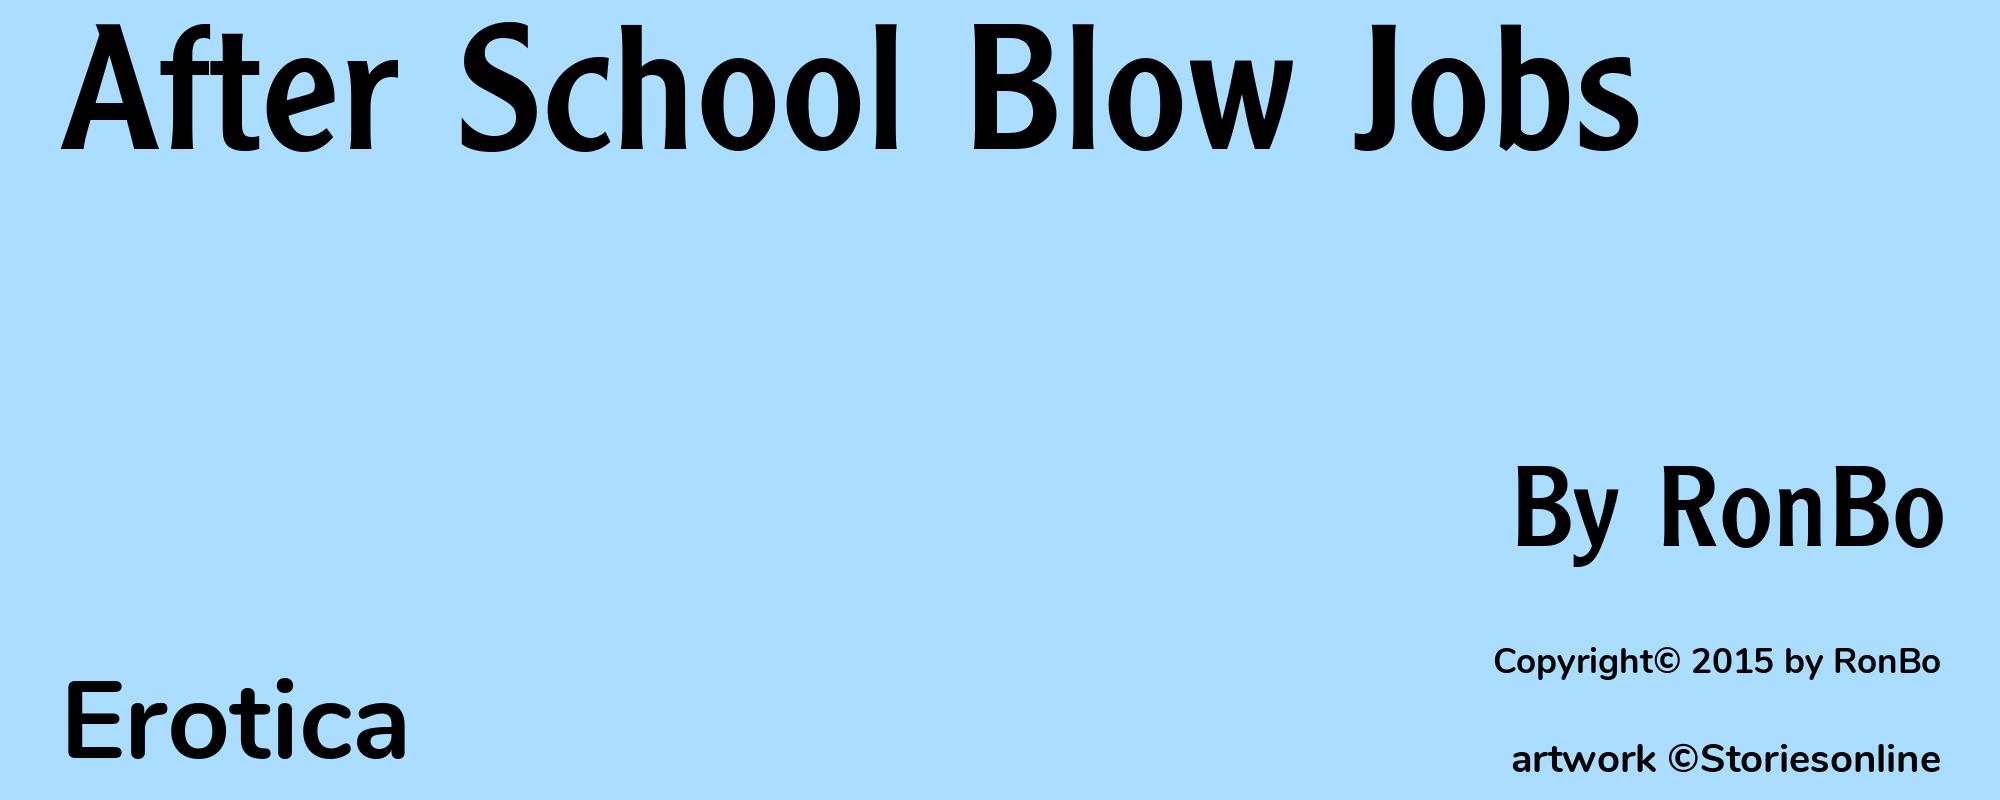 After School Blow Jobs - Cover